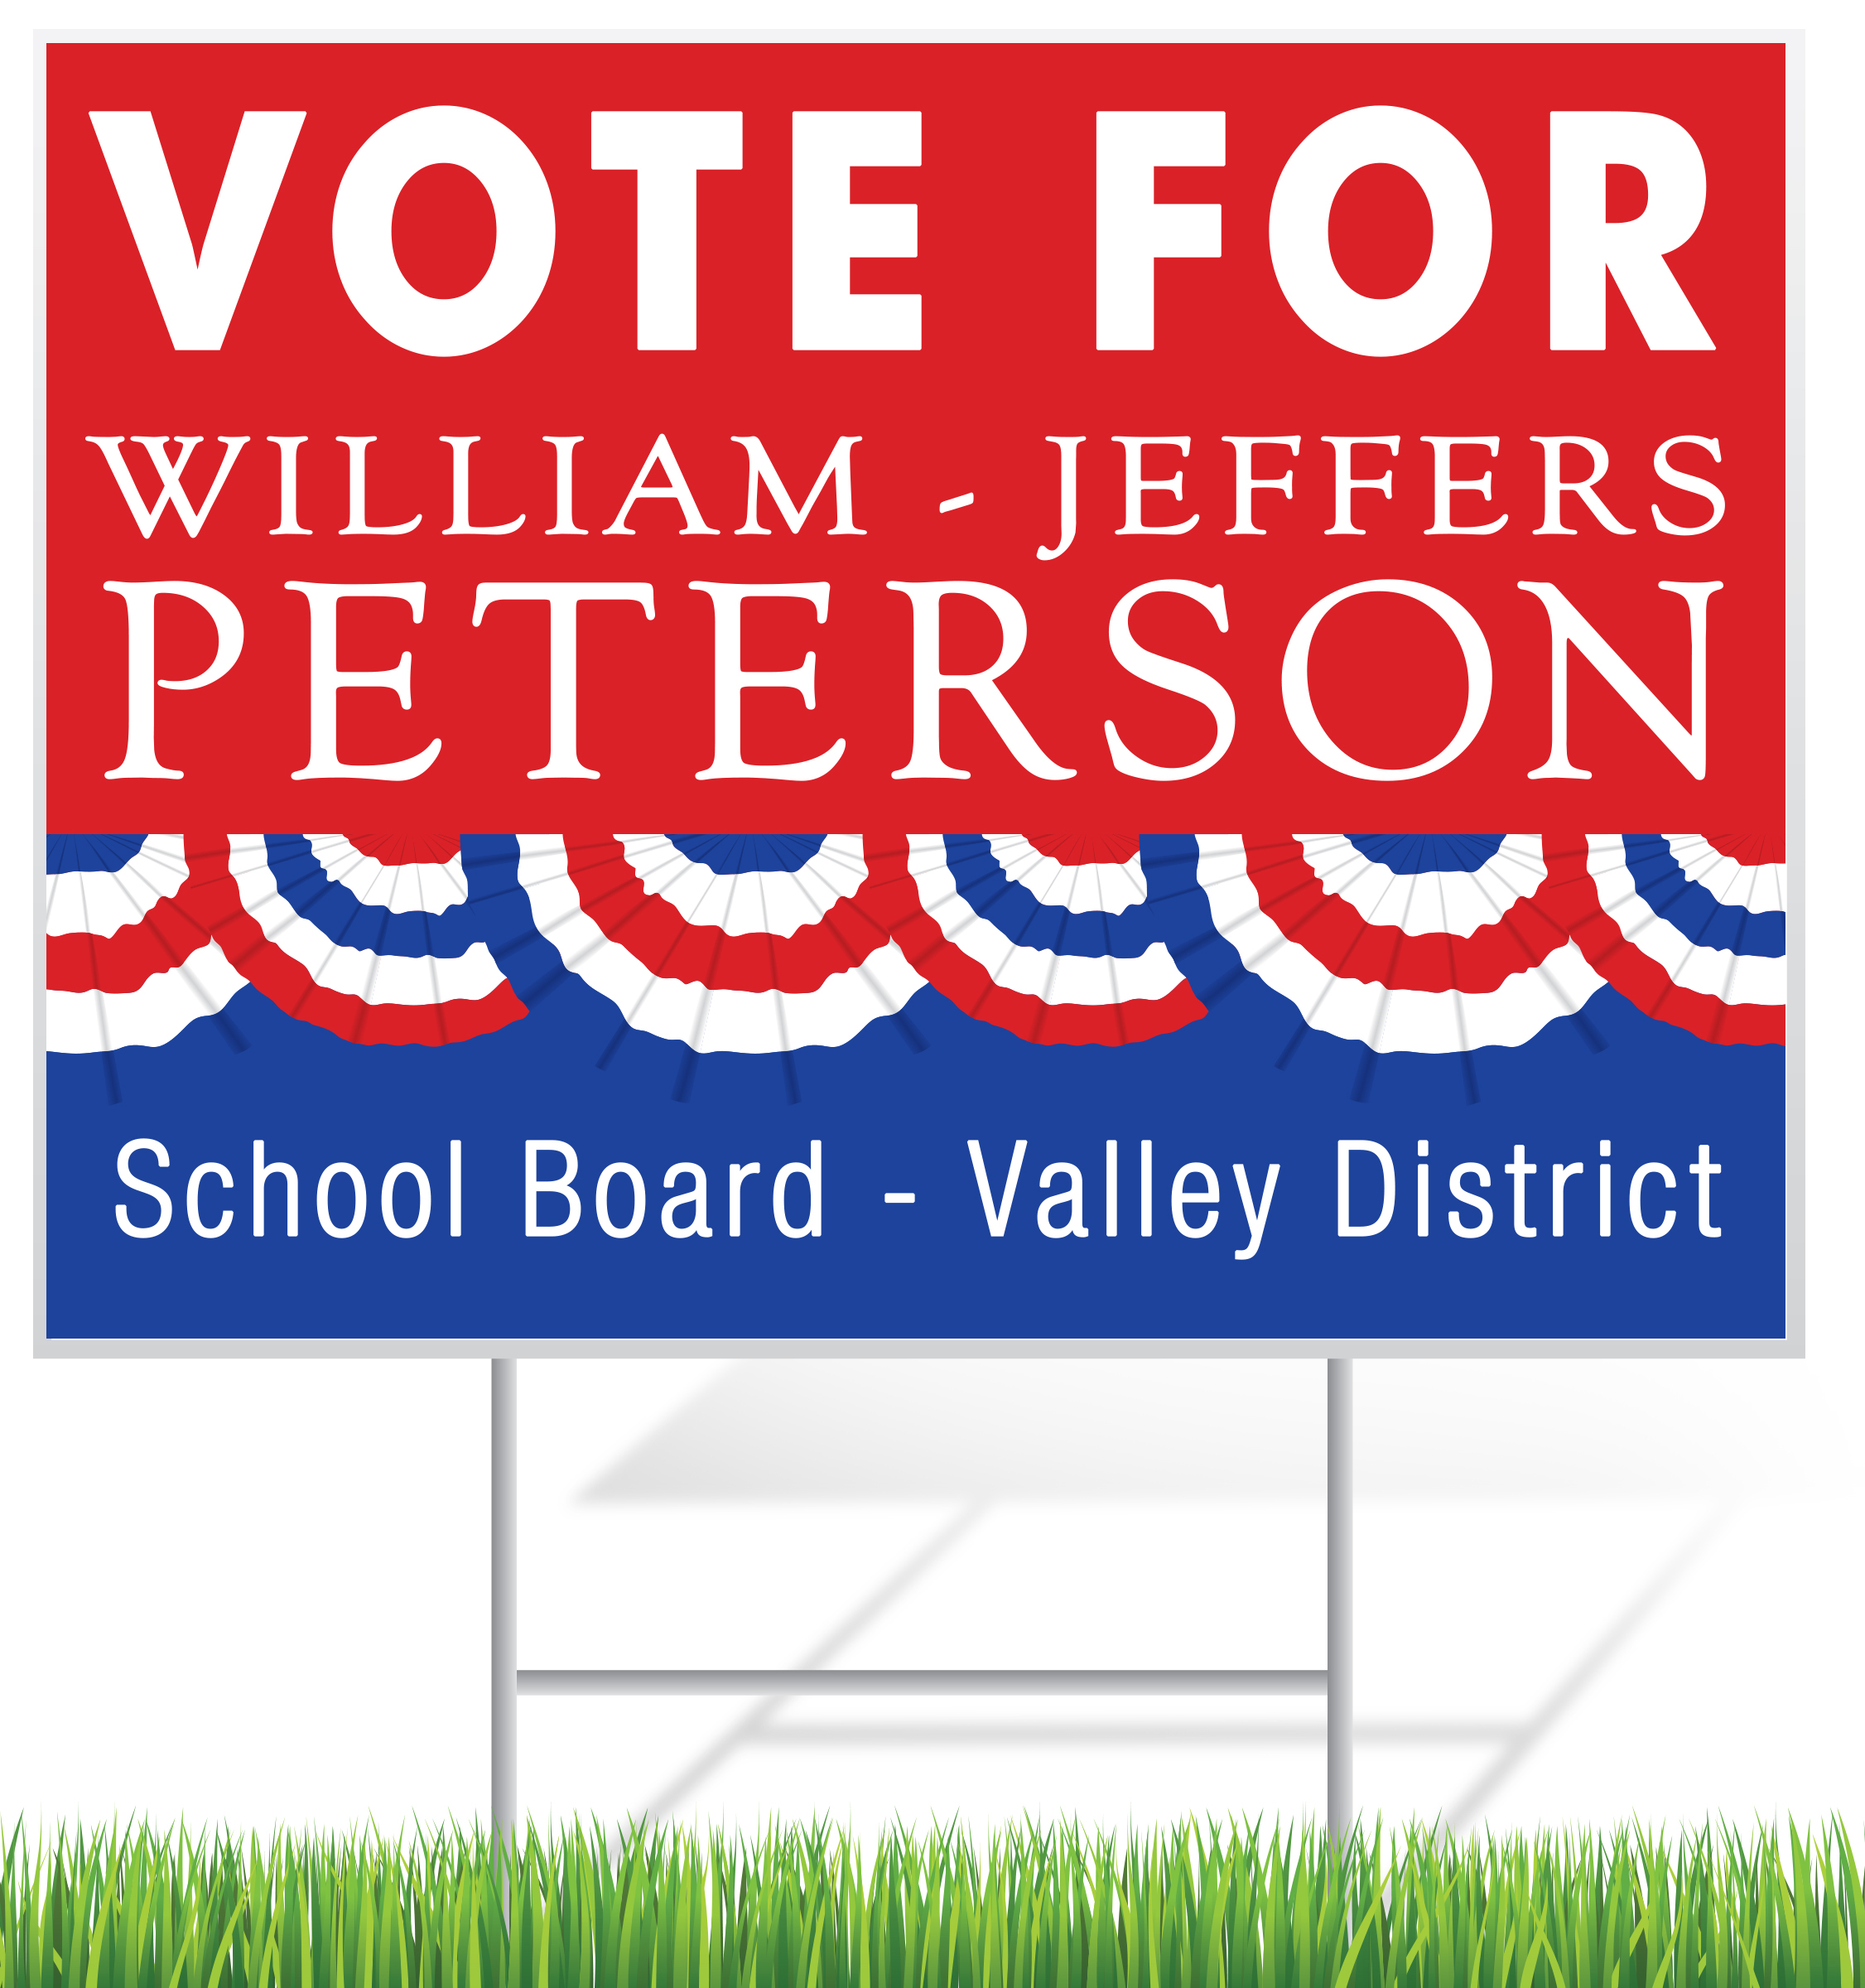 School Board Election Lawn Sign Example | LawnSigns.com